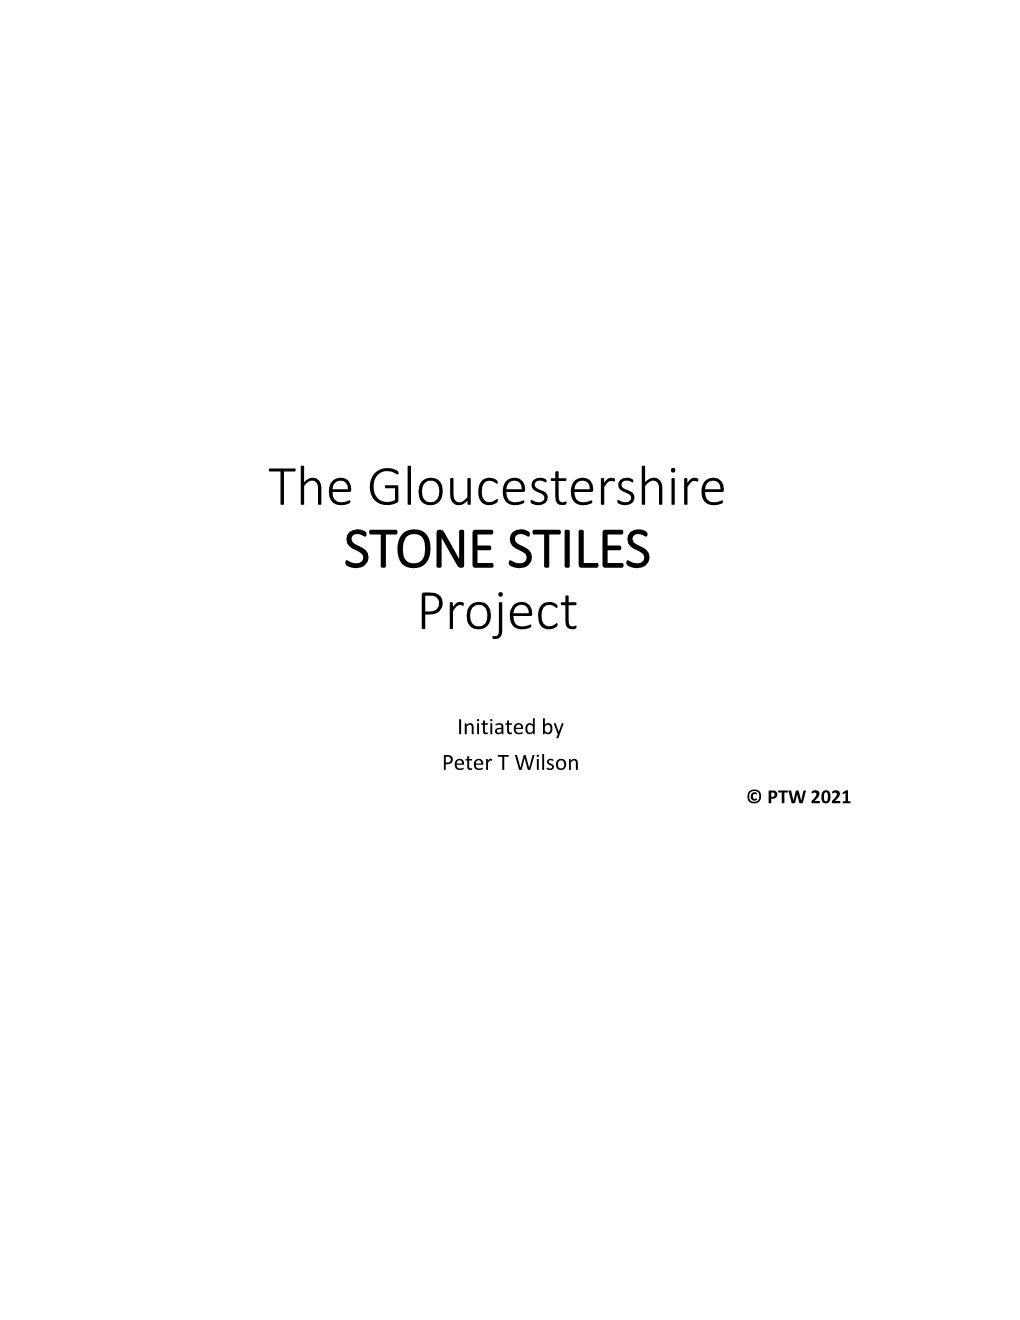 The Gloucestershire STONE STILES Project